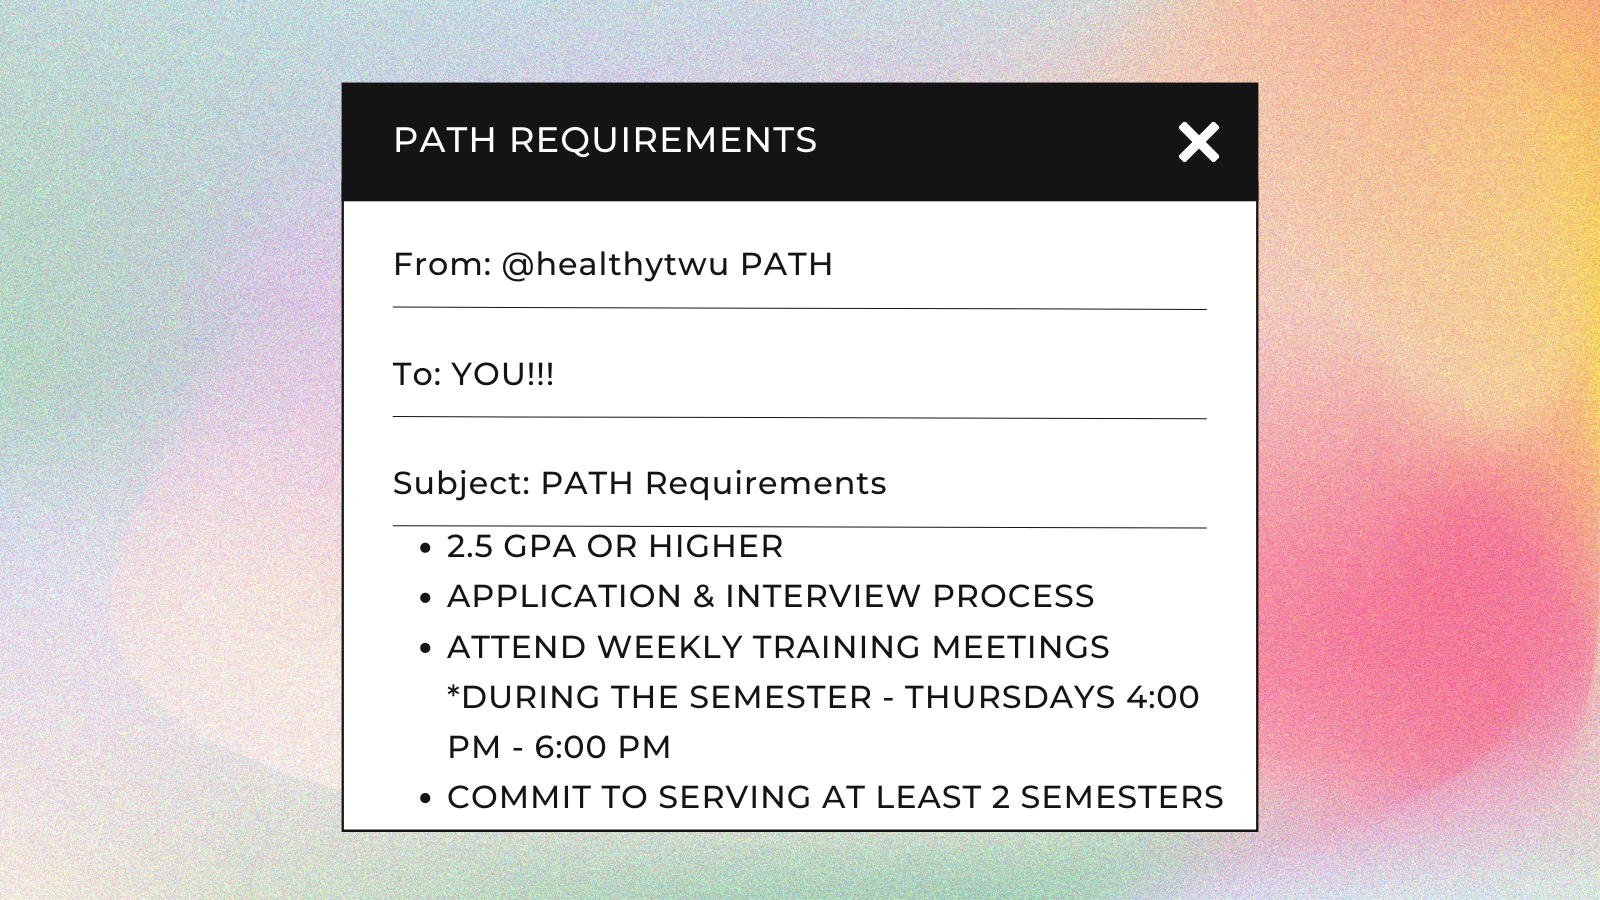 PATH Requirements:  2.5 GPA or higher; Application & Interview Process; Attend weekly training meetings *during the semester - Thursdays 4:00 PM - 6:00 PM; Commit to serving at least 2 semesters